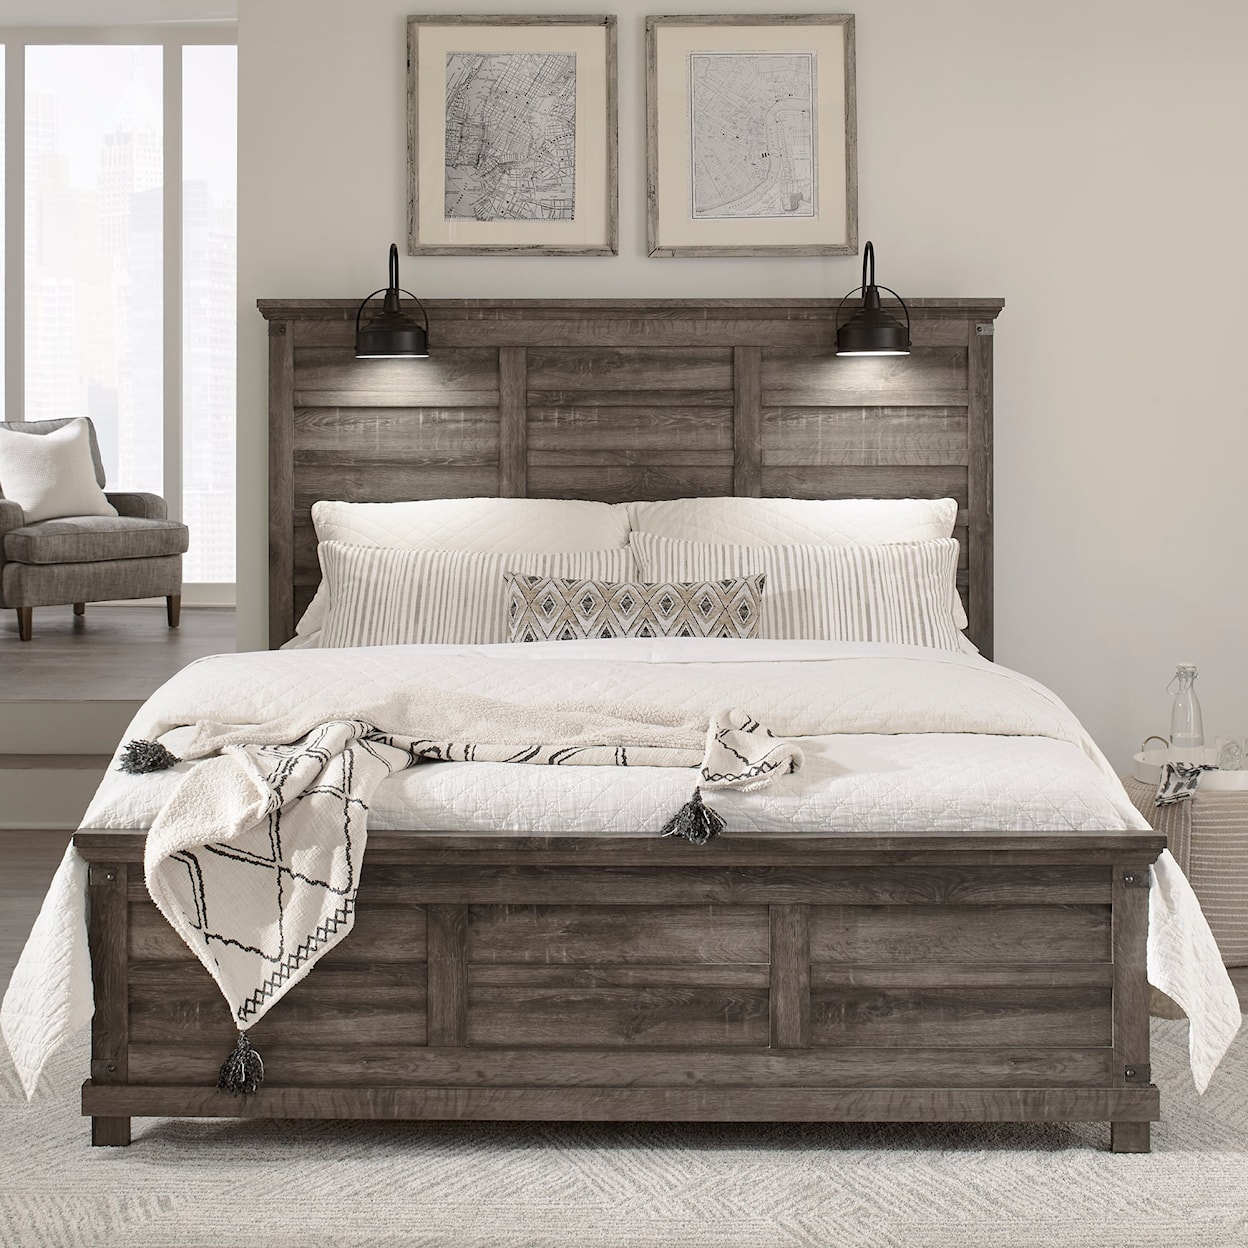 Libby Lakeside Haven 5-Piece King Bedroom Set